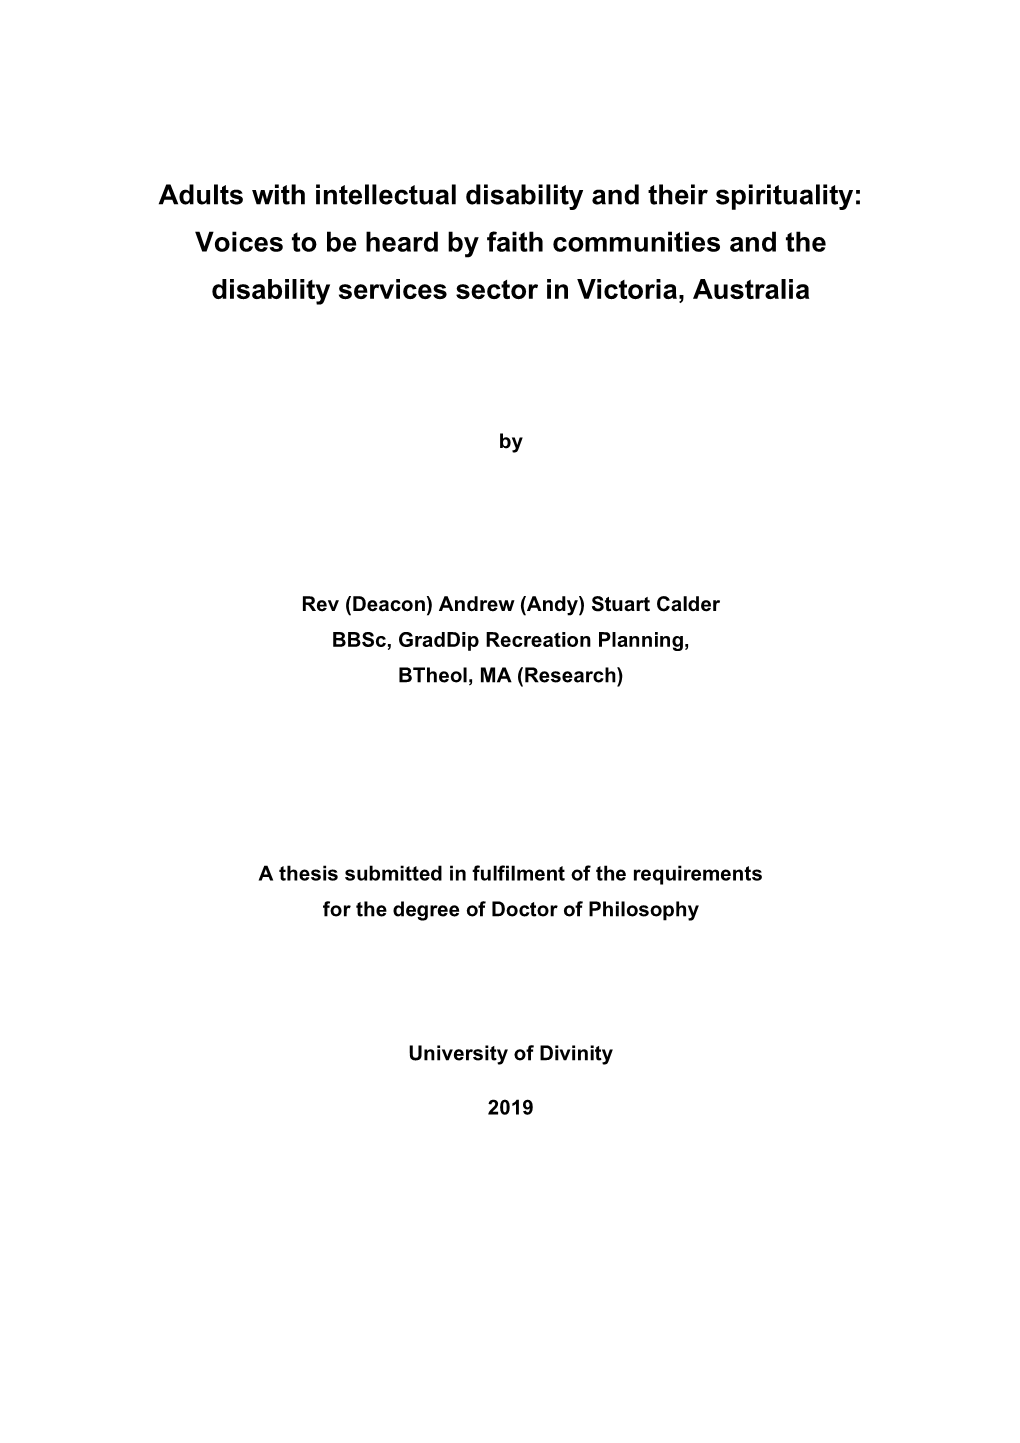 Adults with Intellectual Disability and Their Spirituality: Voices to Be Heard by Faith Communities and the Disability Services Sector in Victoria, Australia